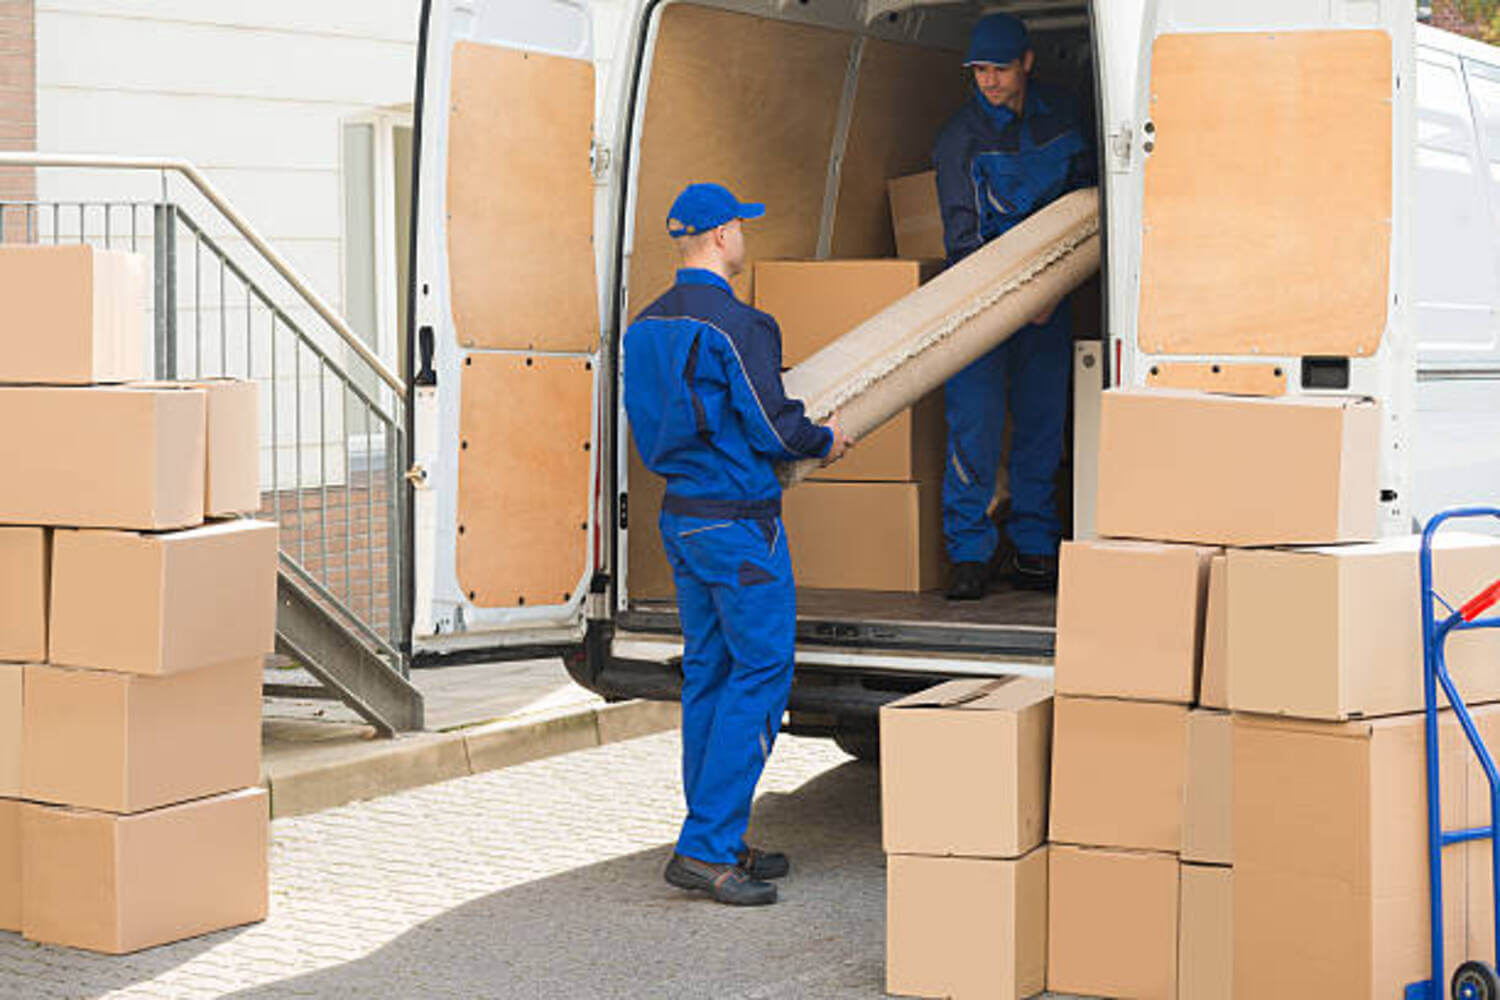 8 Questions to Ask Before Hiring a Seattle Moving Company